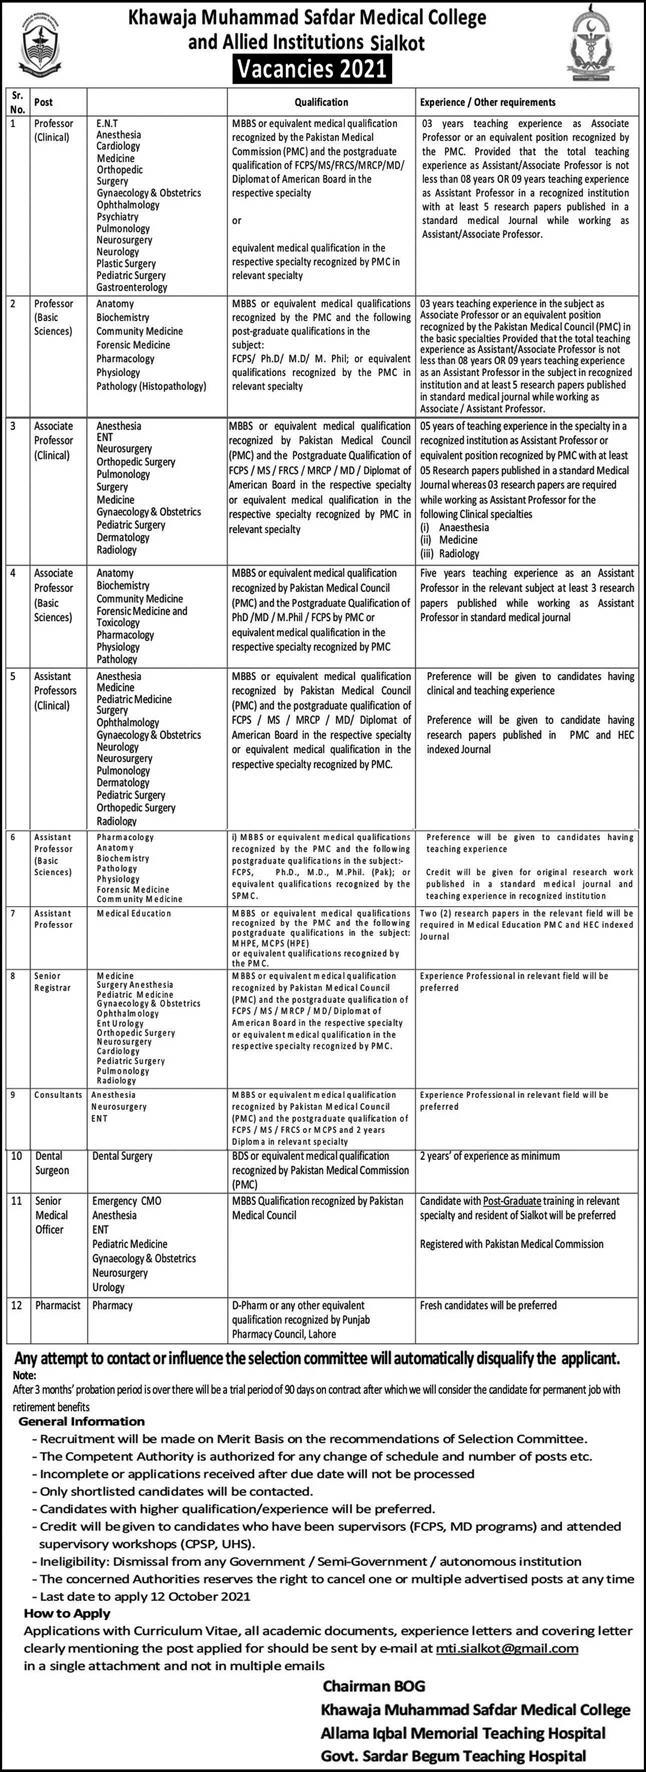 Khawaja Muhammad Safdar Medical College and Allied Institutions Sialkot Jobs 2021